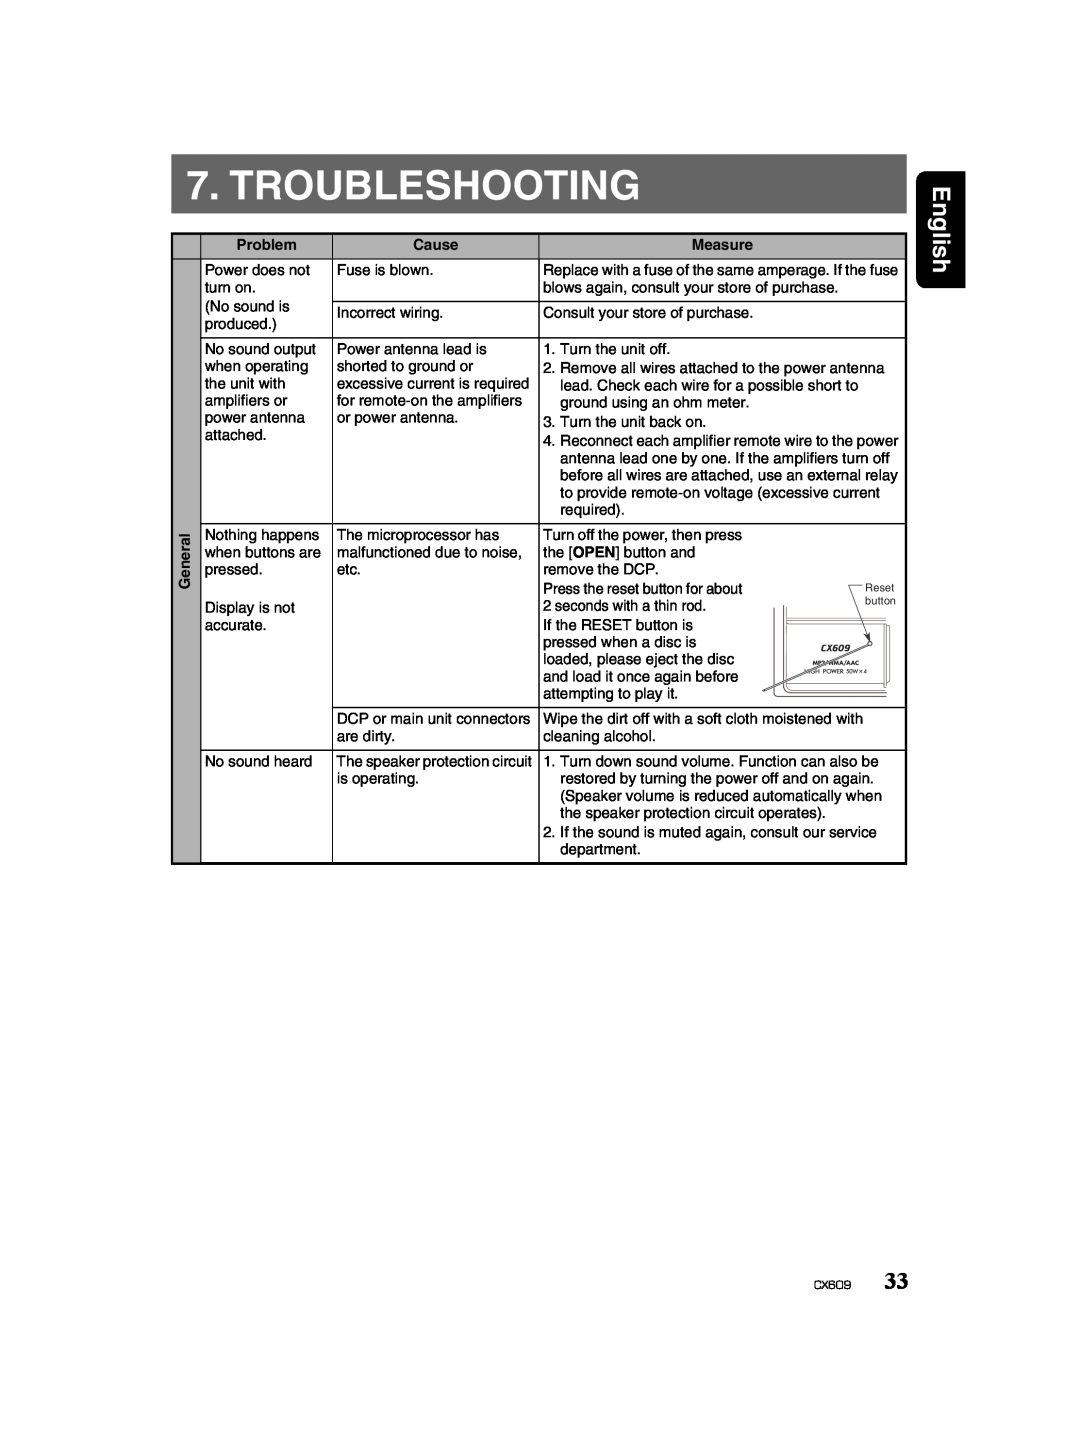 Clarion CX609 owner manual Troubleshooting, English, Problem, Cause, Measure 